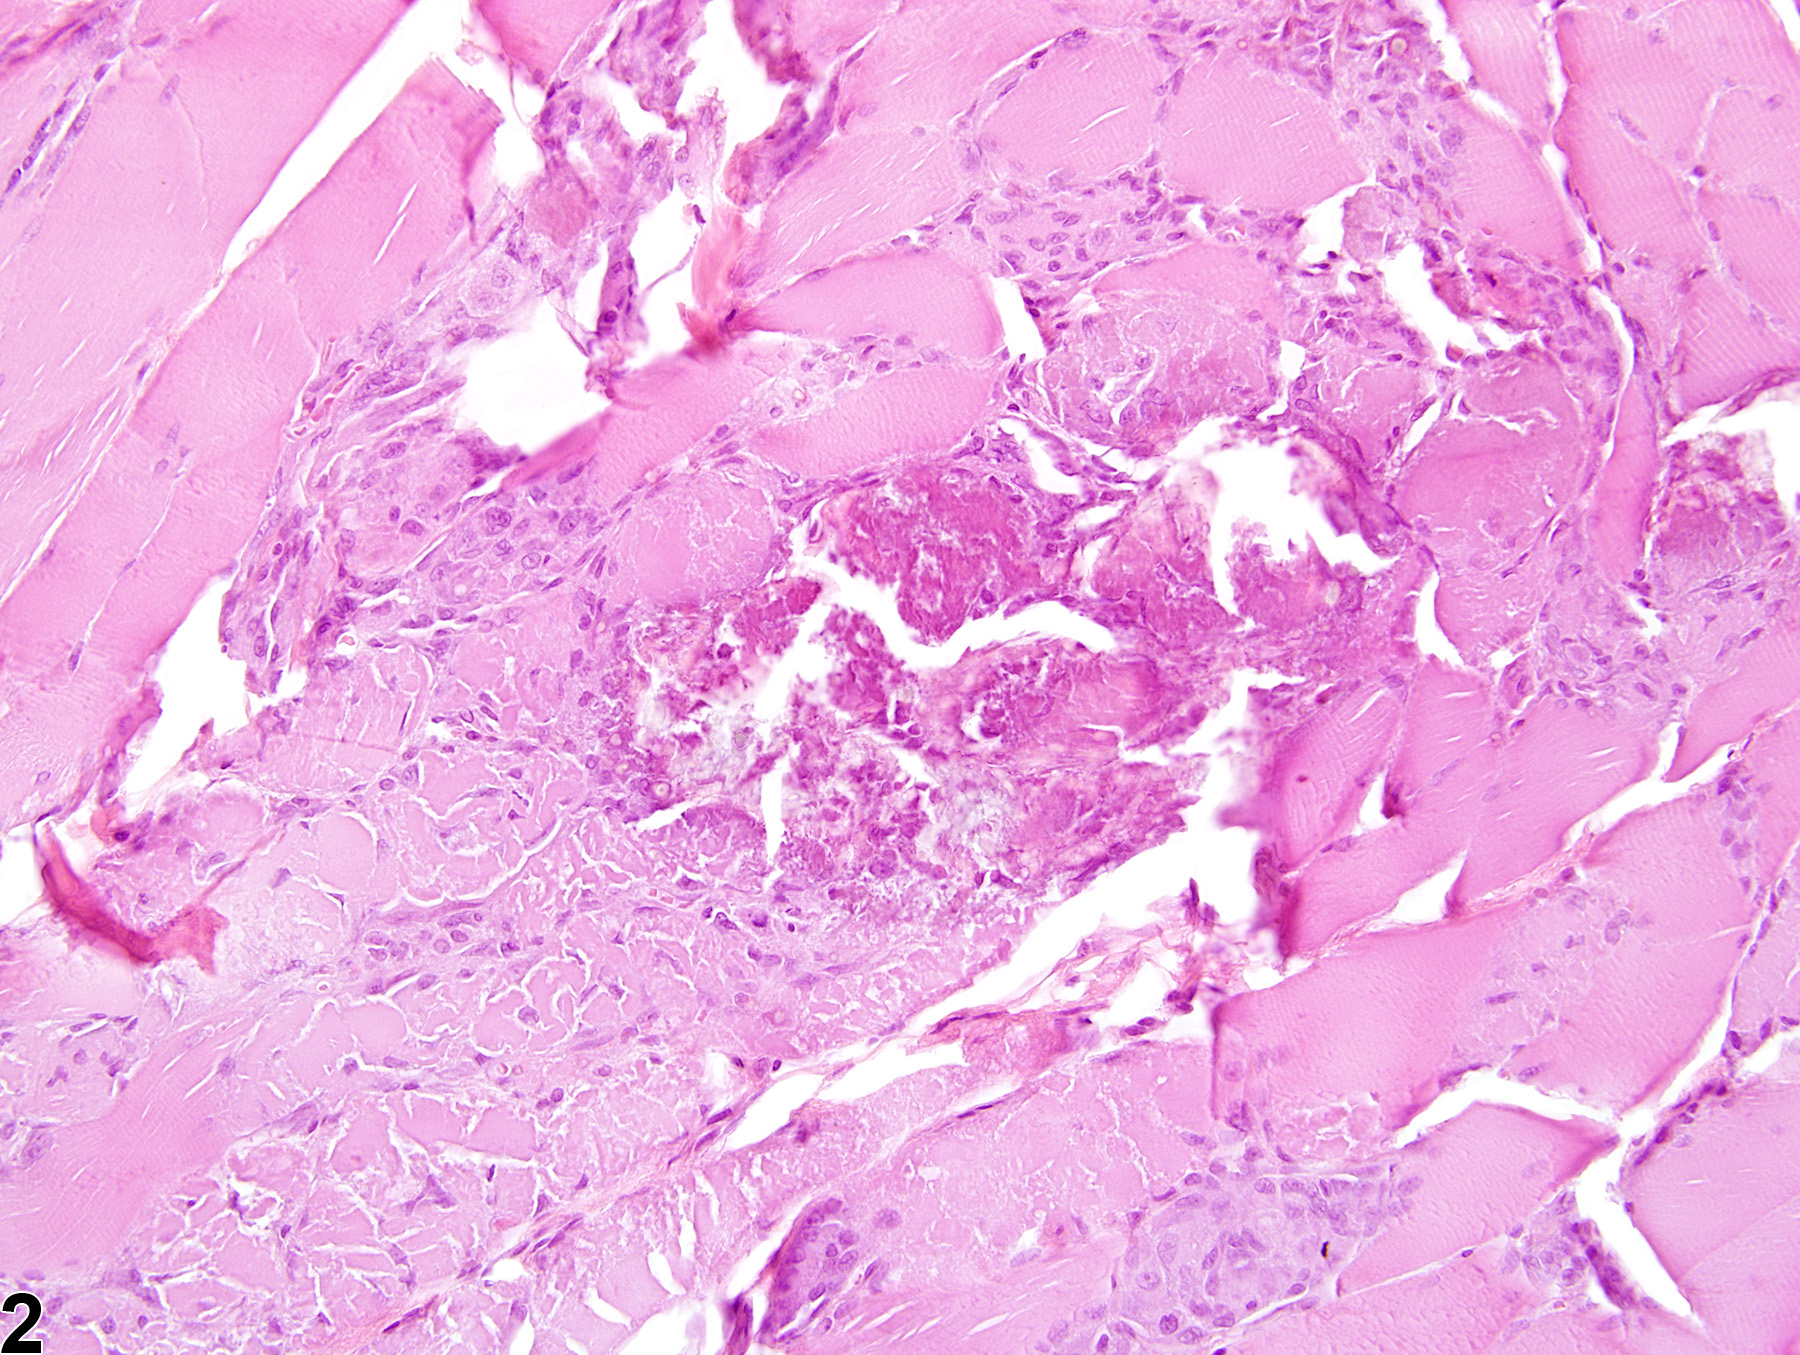 Image of necrosis in the skeletal muscle from a male F344/N rat in a chronic study